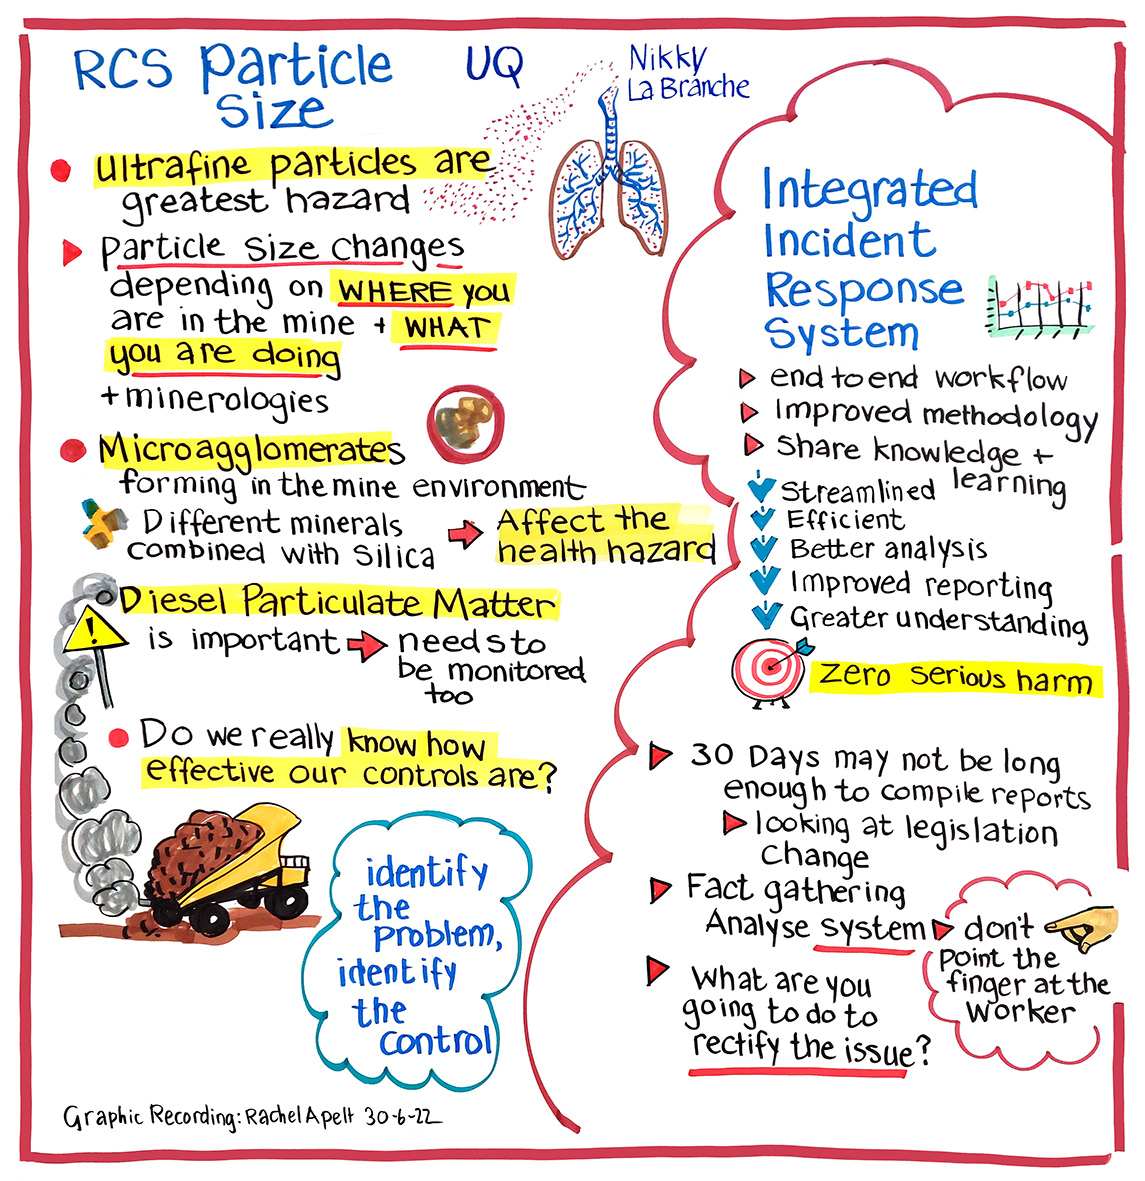 MSHAC RCS forum graphical recording